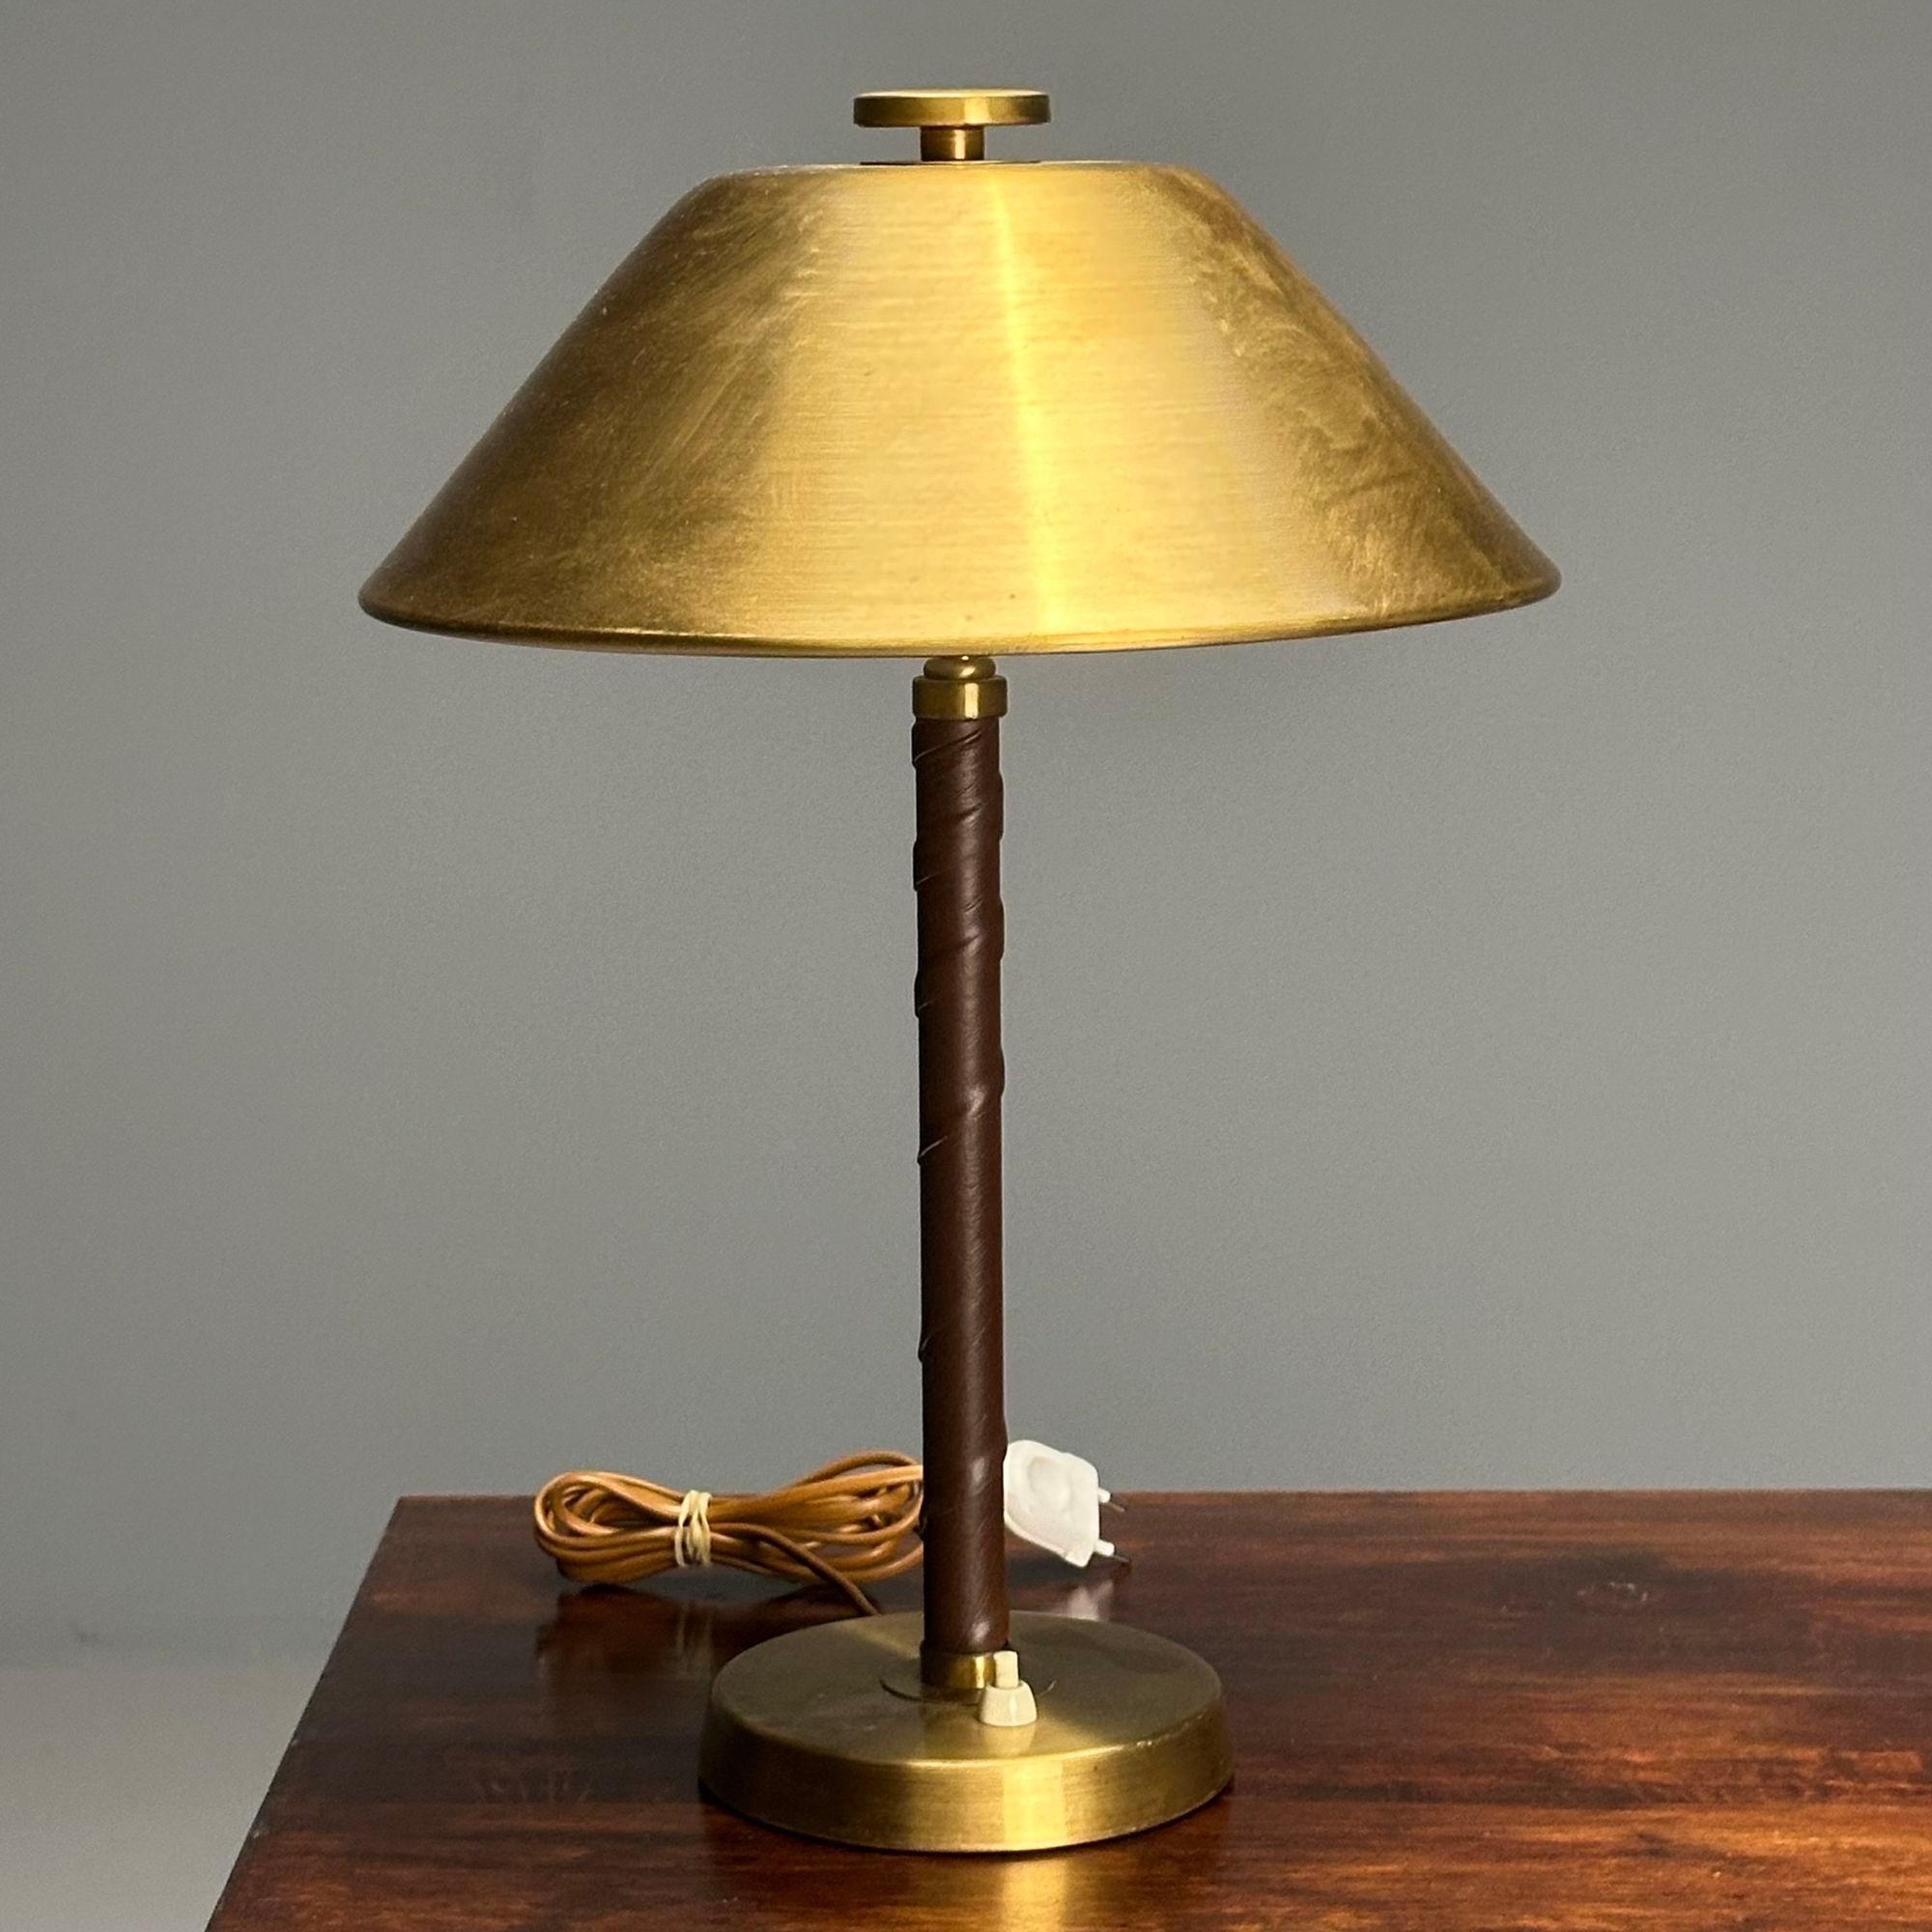 Einar Bäckström, Swedish Mid-Century Modern, Table Lamps, Leather, Brass, 1940s

Swedish modern brass and leather-wrapped table or desk lamp designed by Einar Backstrom in Sweden circa 1940s. Marked 'EB Made in Sweden 5014'.

Brass, Leather
Sweden,